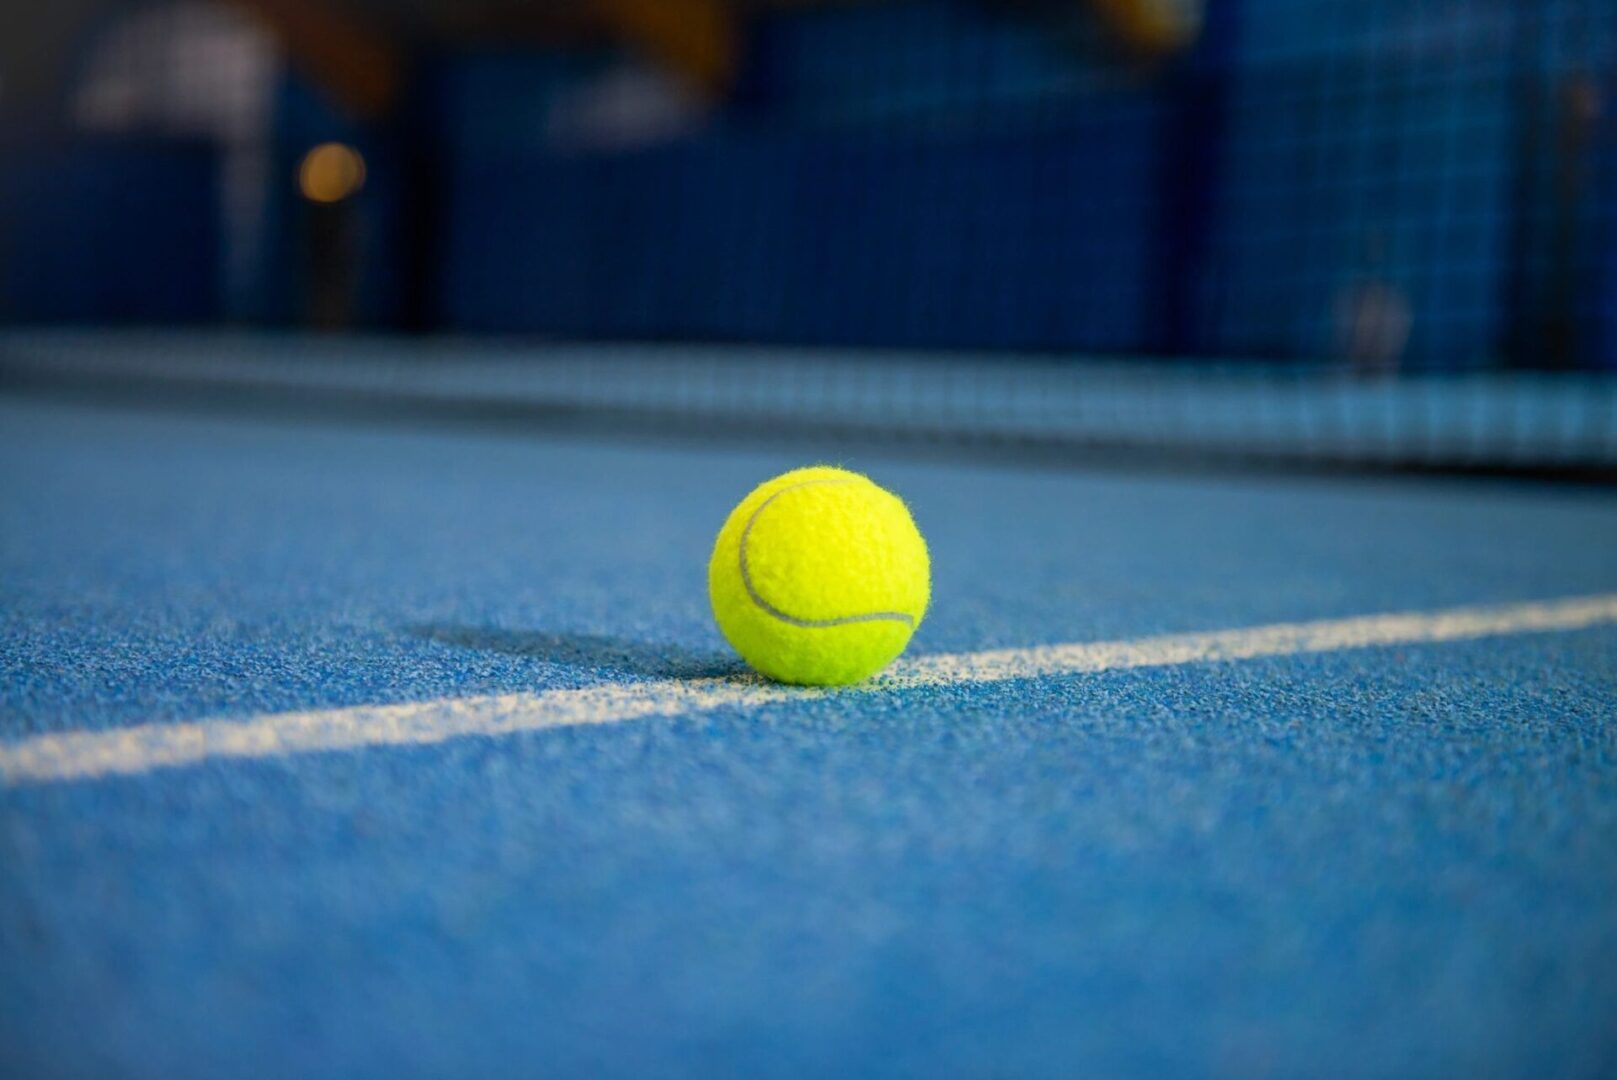 A tennis ball is sitting on the court.